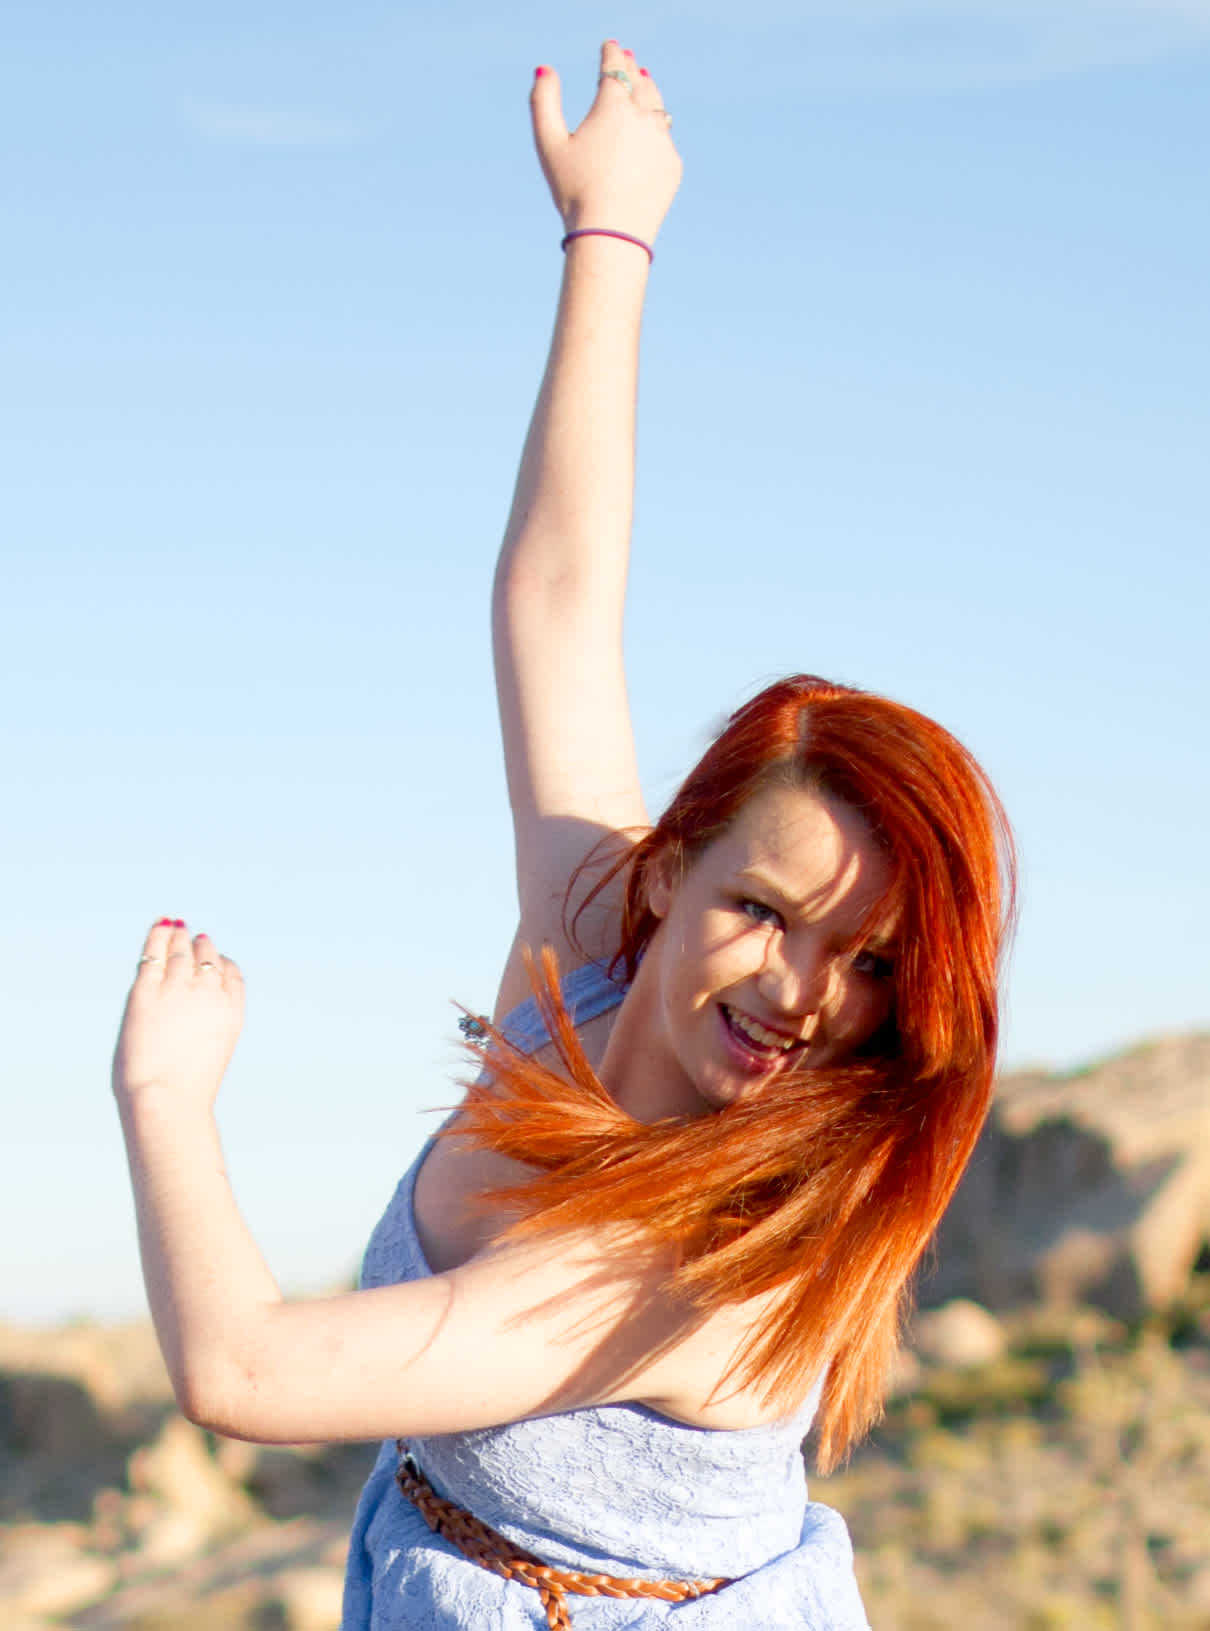 Girl dancing with arms waving in sunlight. 